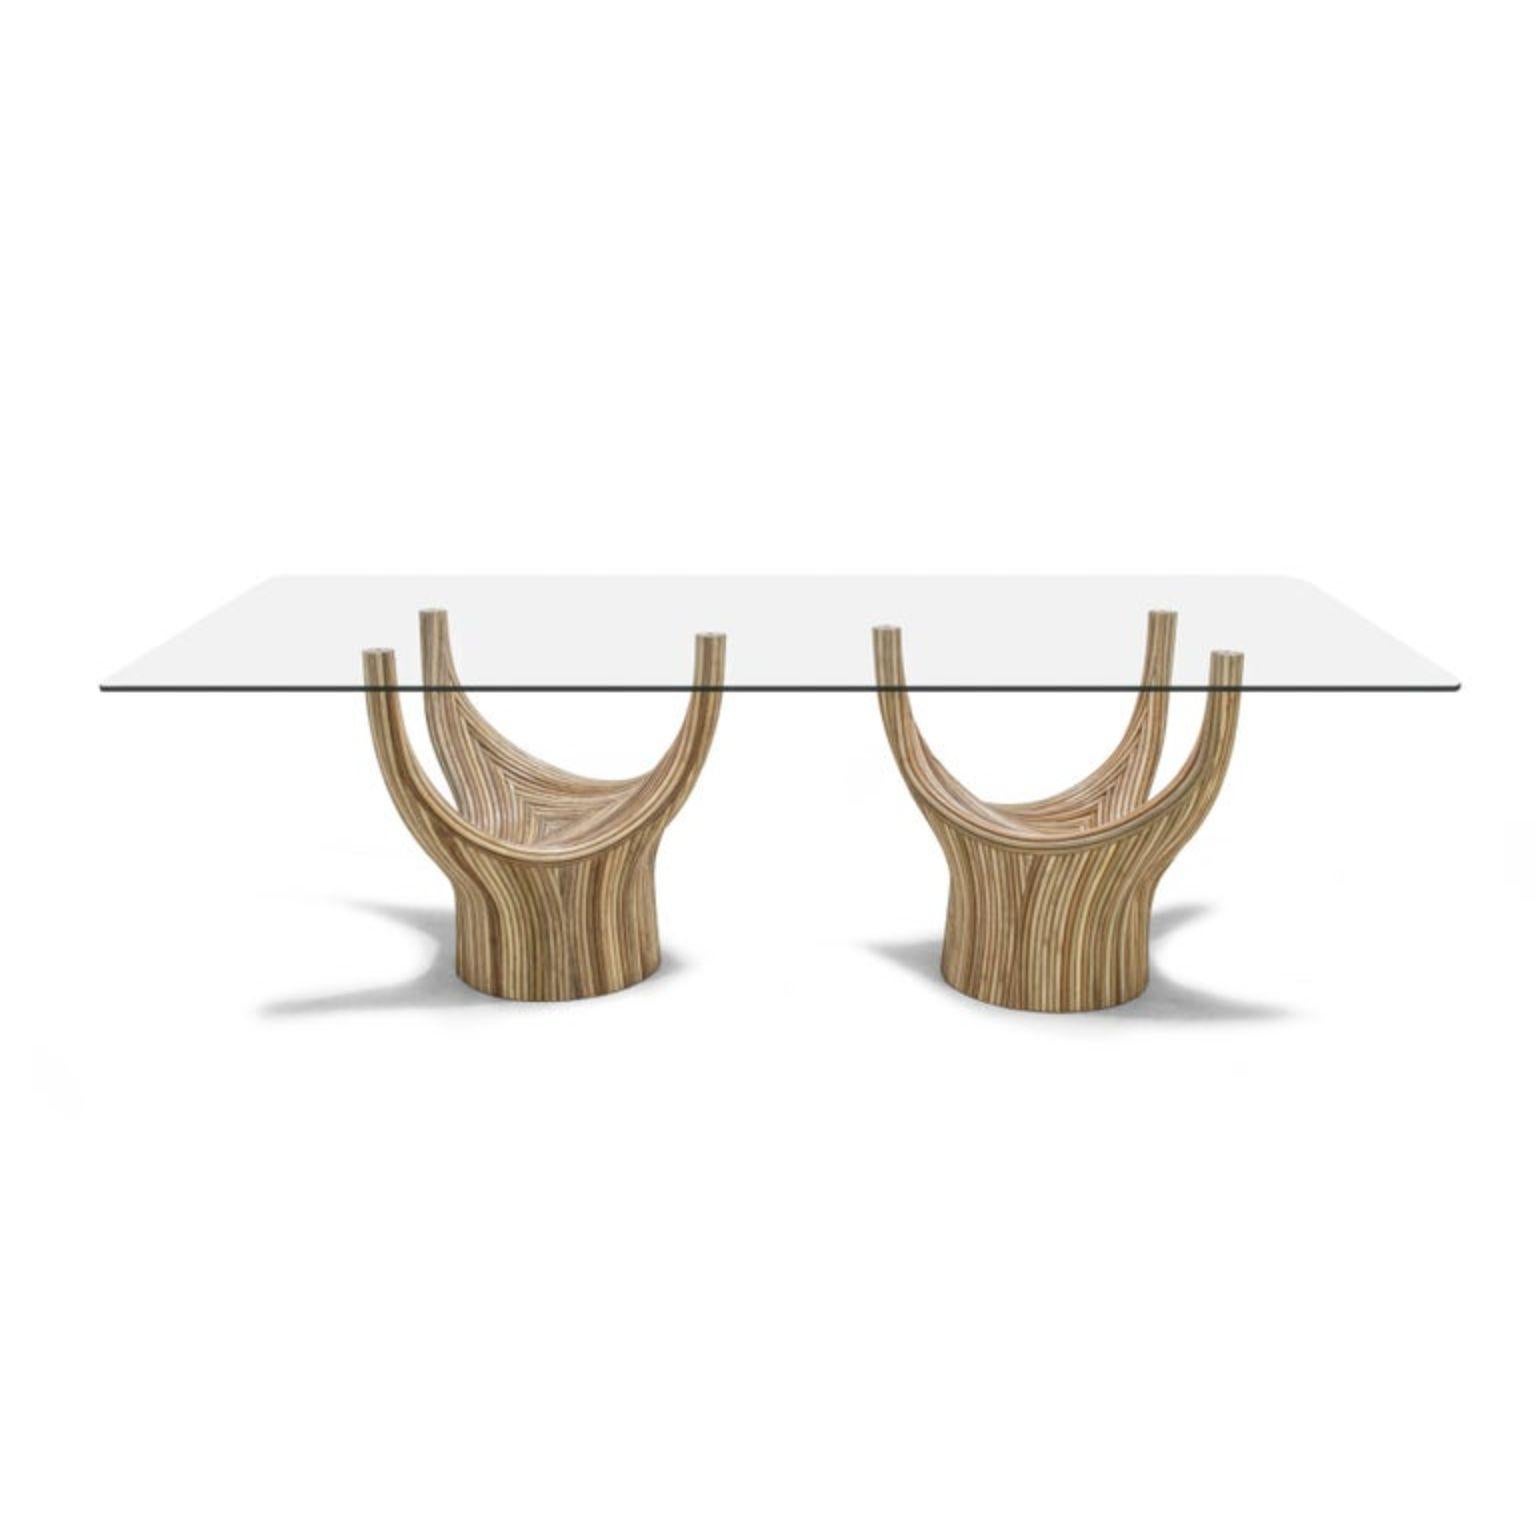 Acacia rectangular dining table, Kenneth Cobonpue
Materials: Rattan, steel
Dimensions: D 120 x W 240 x H 74 cm

Kenneth Cobonpue is a multi-awarded furniture designer and manufacturer from Cebu, Philippines. His passage to design began in 1987,